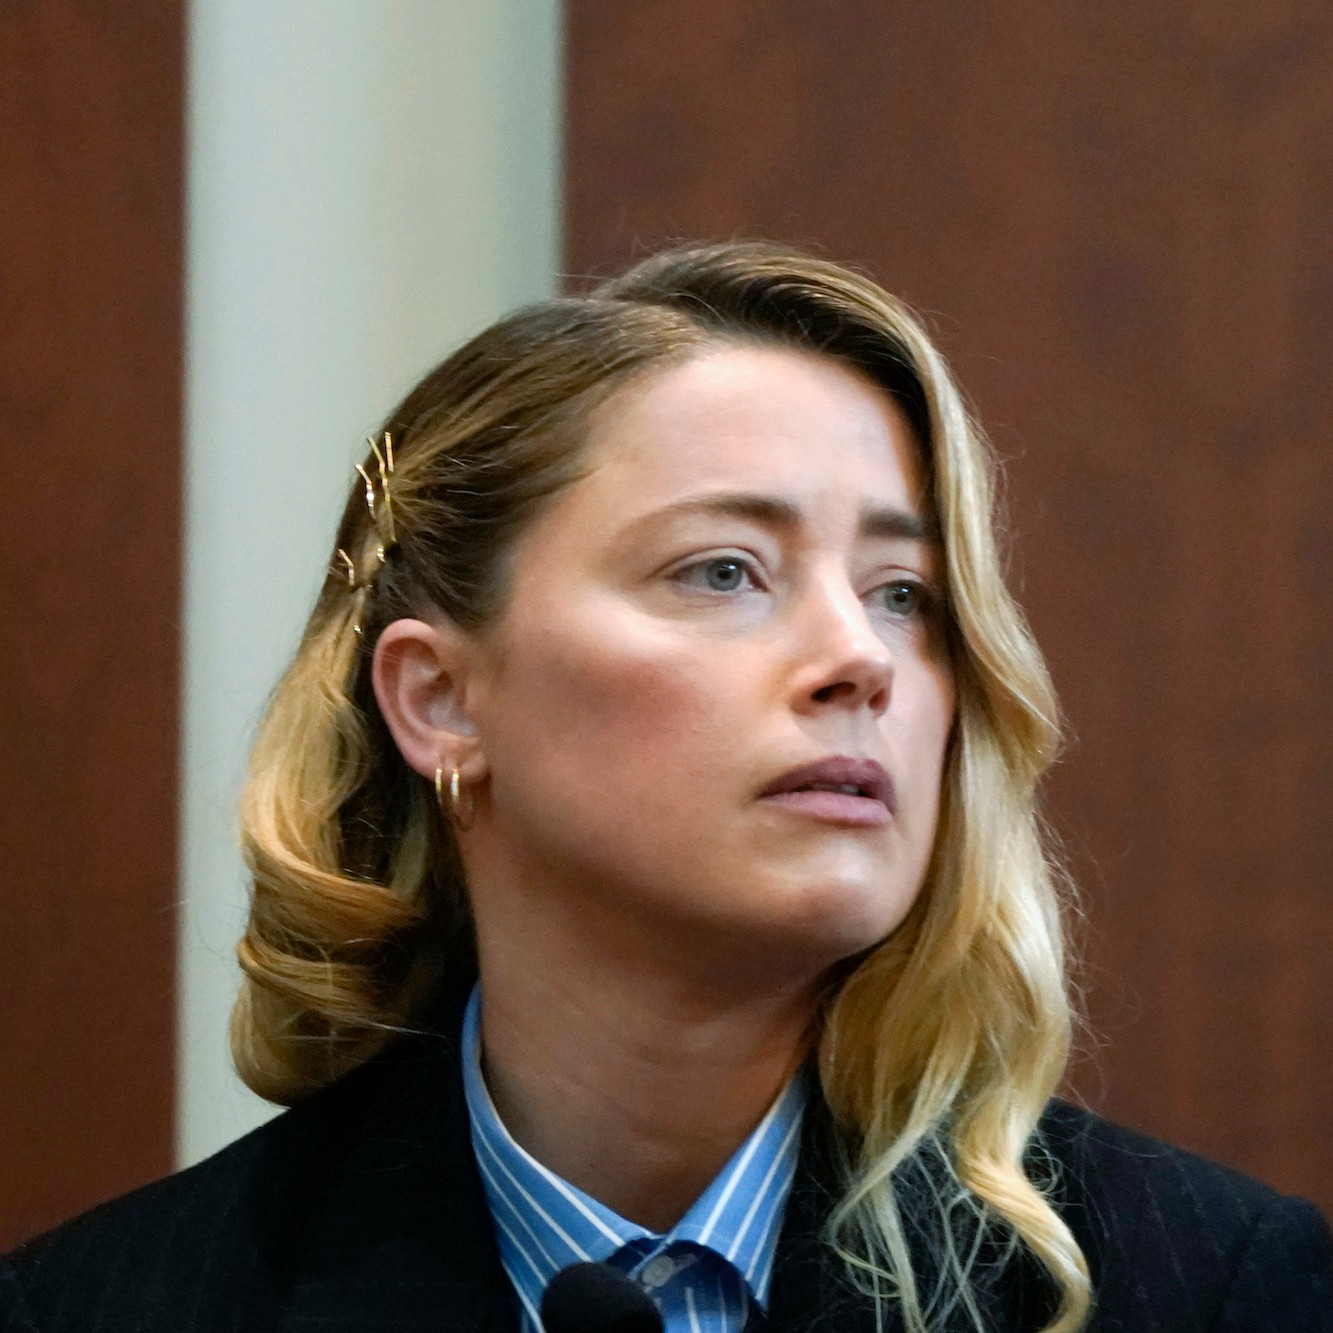 Amber Heard Says Johnny Depp Did a 'Cavity Search' on Her